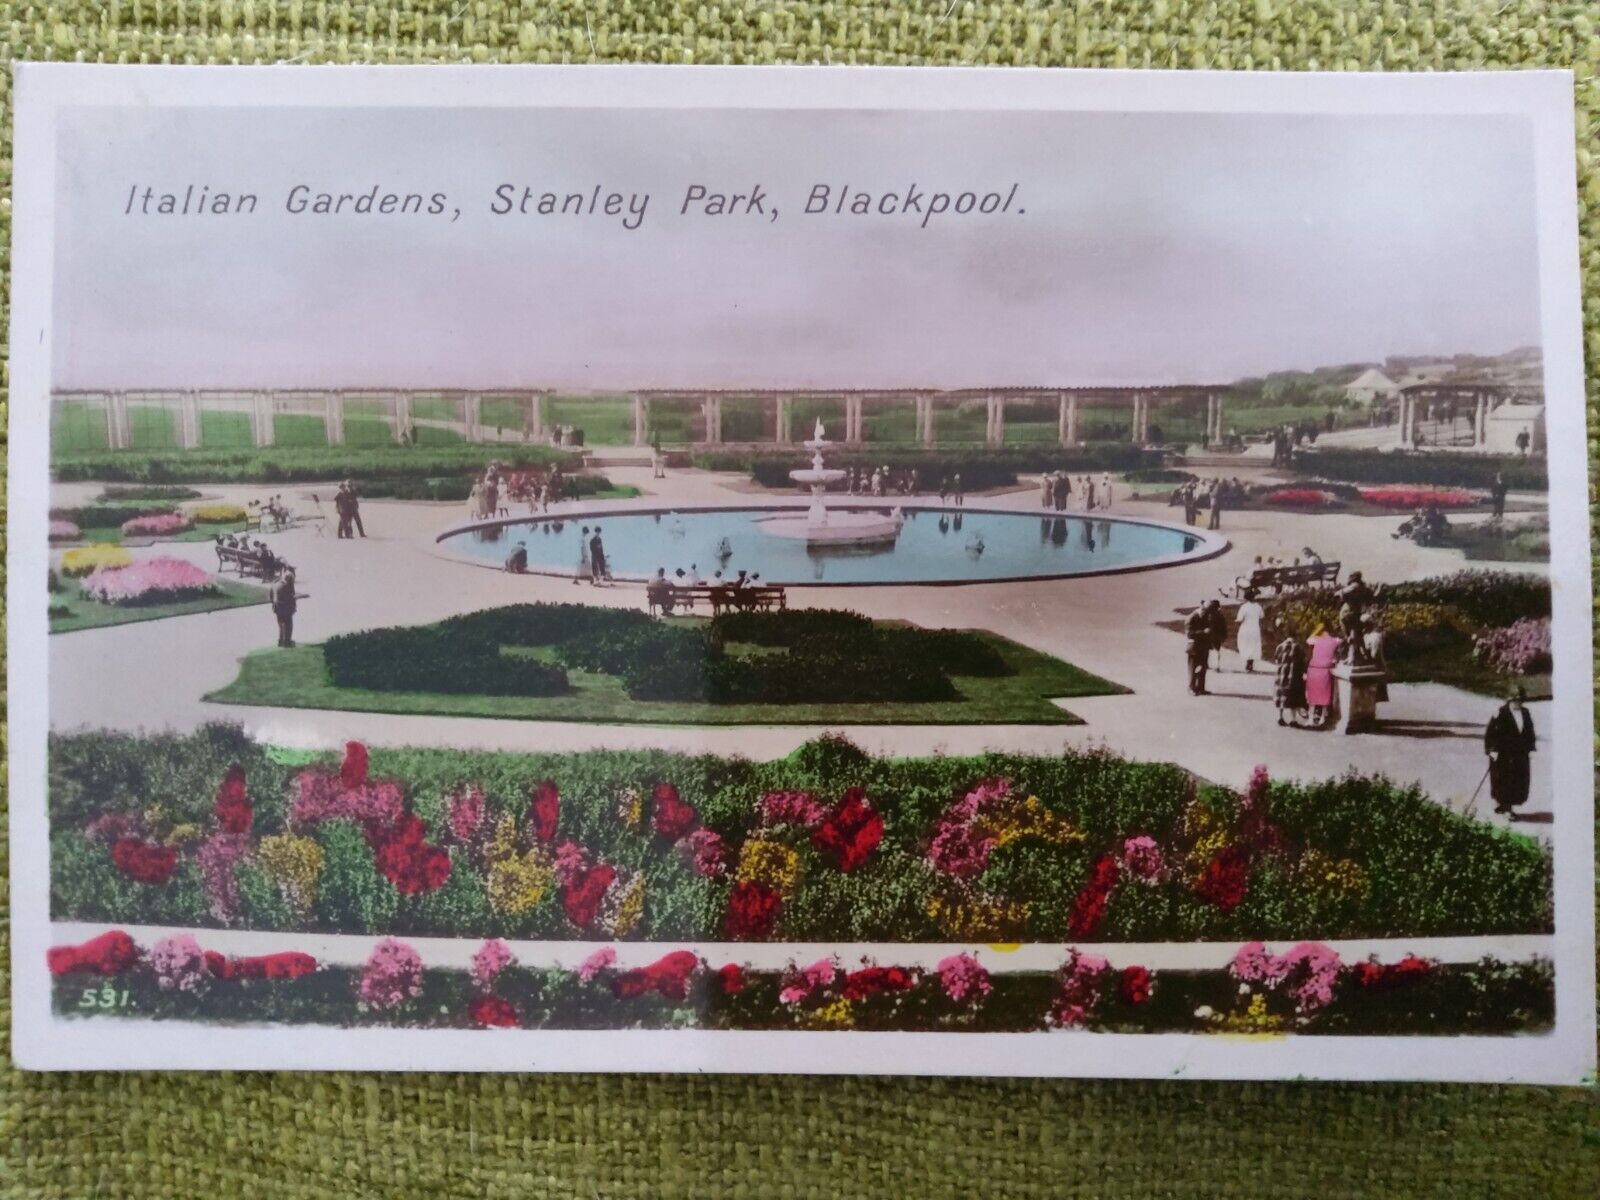 House Clearance - 1920's Italian Gardens, Stanley Park, Blackpool, RP Service. The Advance Series